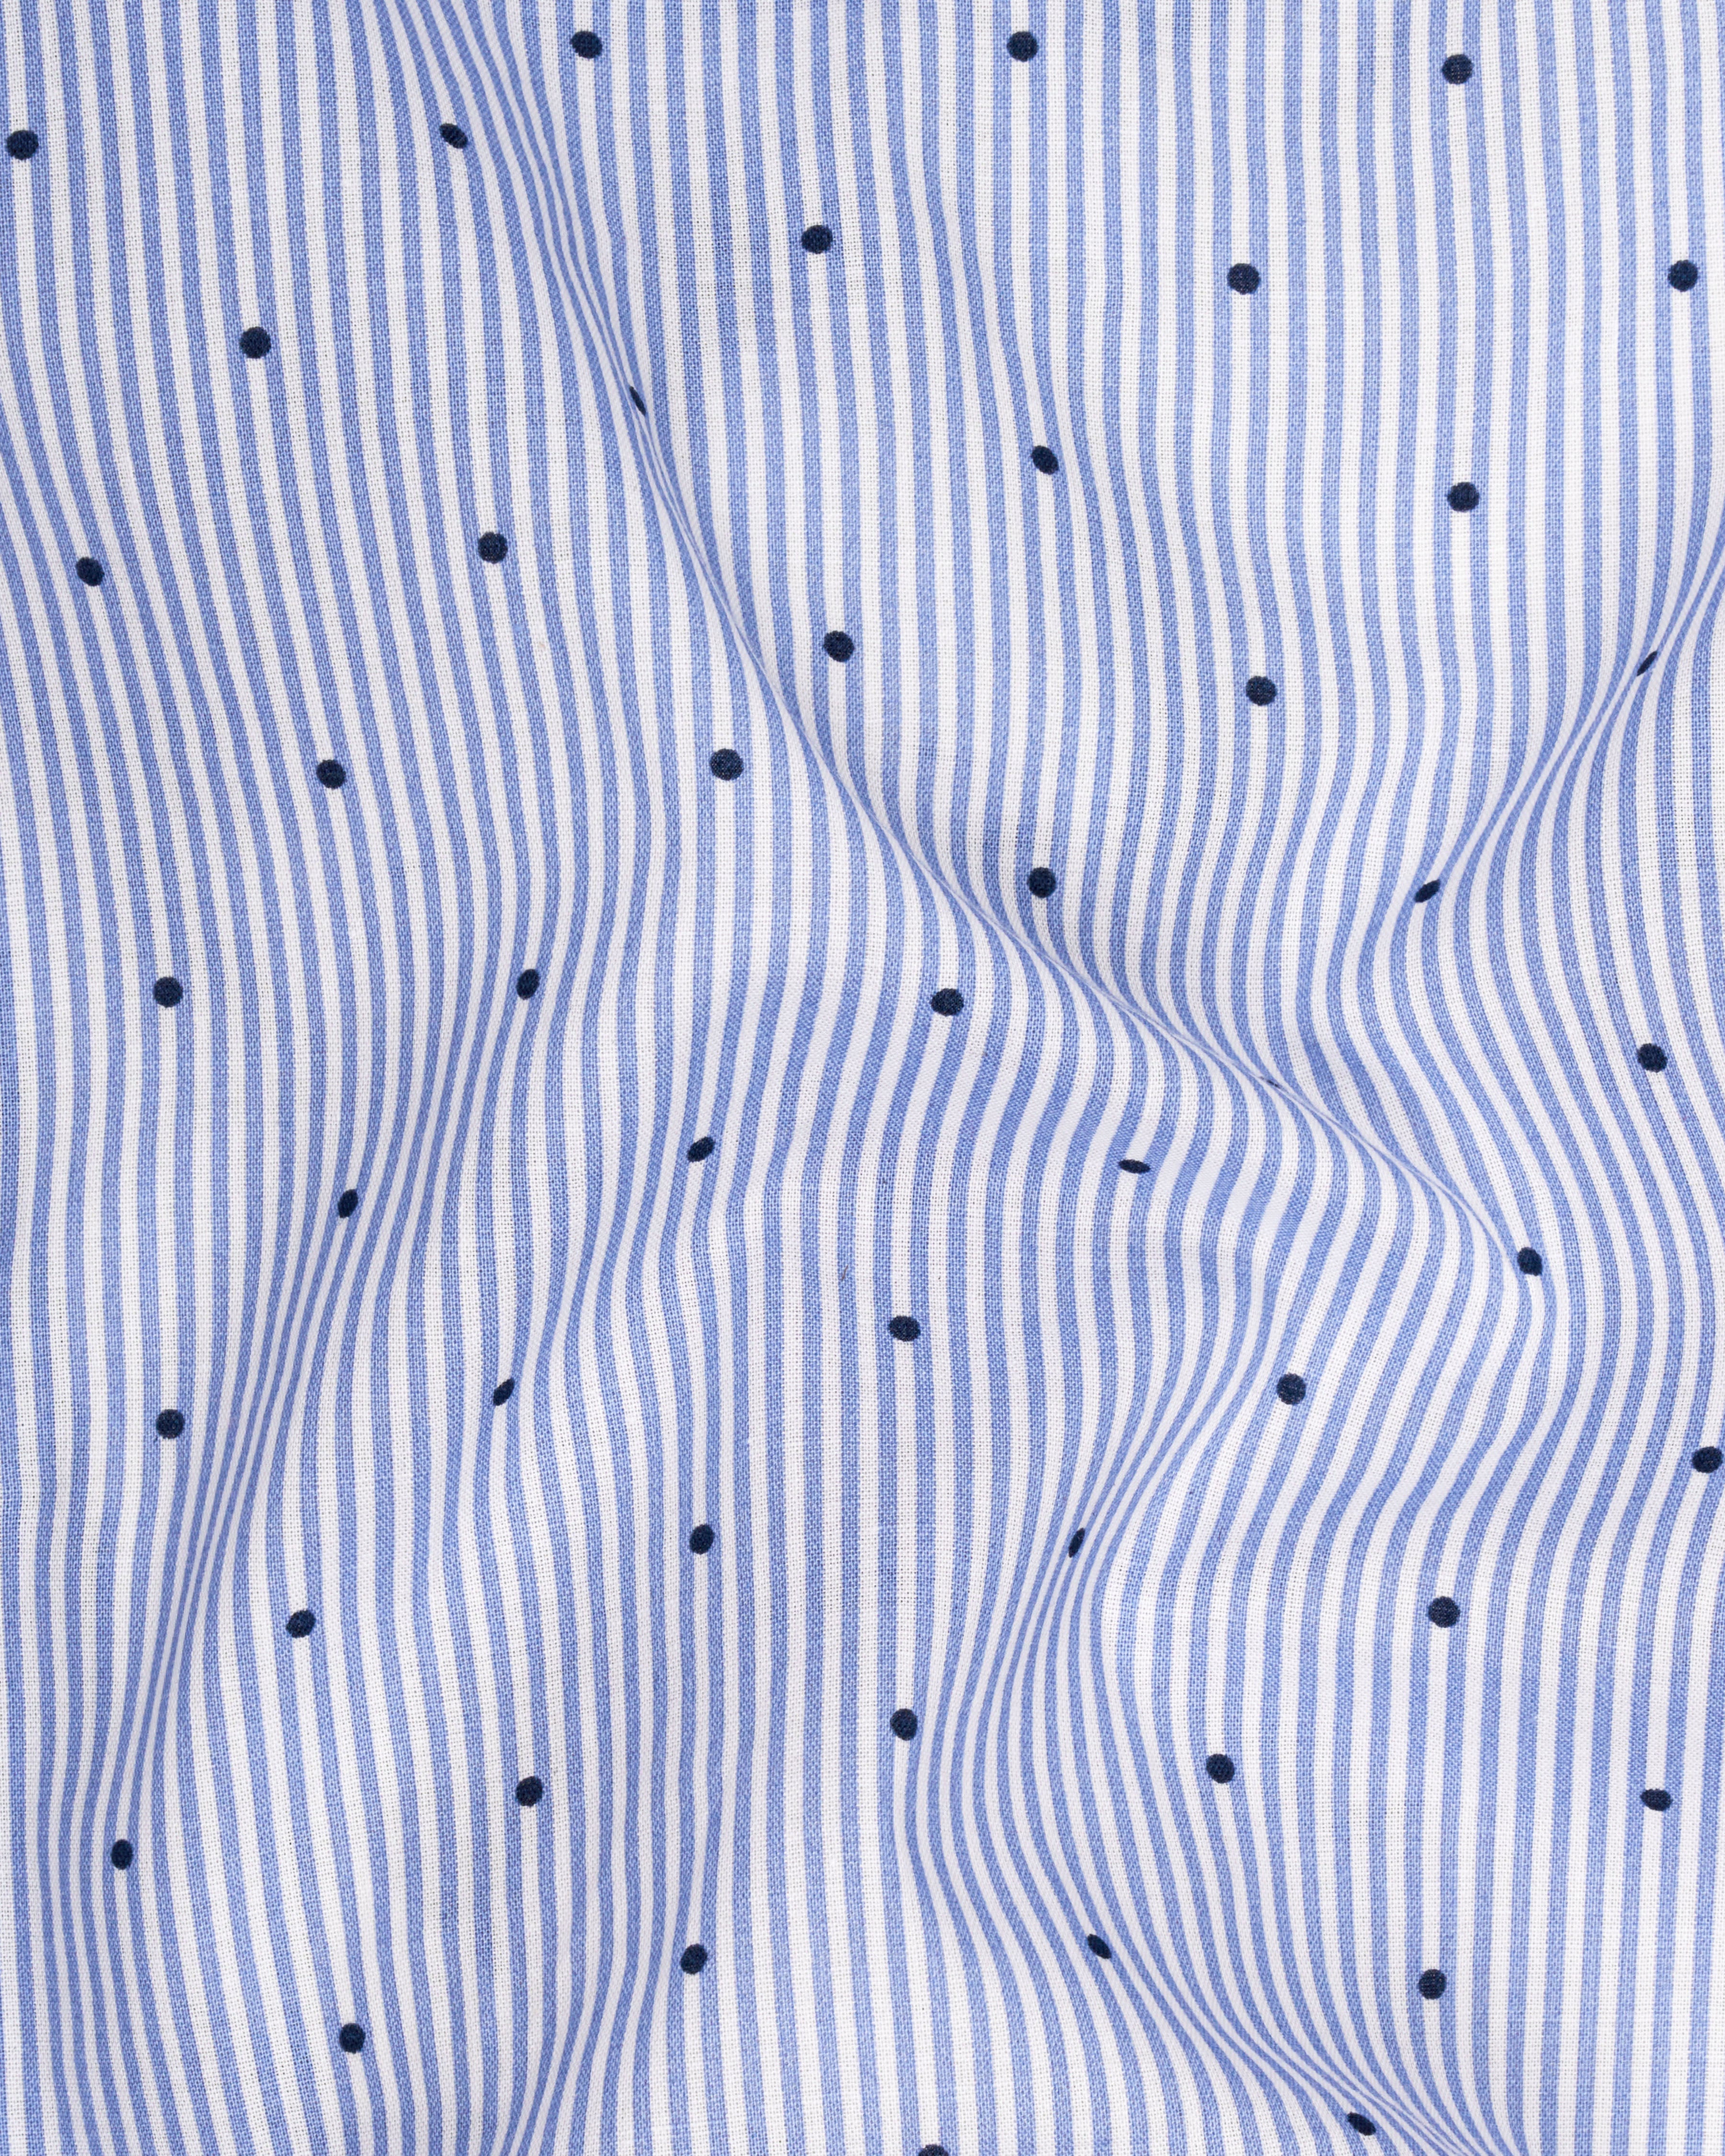 Regent Blue Pinstriped with White Collar Premium Cotton Shirt  8707-WCC-38,8707-WCC-H-38,8707-WCC-39,8707-WCC-H-39,8707-WCC-40,8707-WCC-H-40,8707-WCC-42,8707-WCC-H-42,8707-WCC-44,8707-WCC-H-44,8707-WCC-46,8707-WCC-H-46,8707-WCC-48,8707-WCC-H-48,8707-WCC-50,8707-WCC-H-50,8707-WCC-52,8707-WCC-H-52